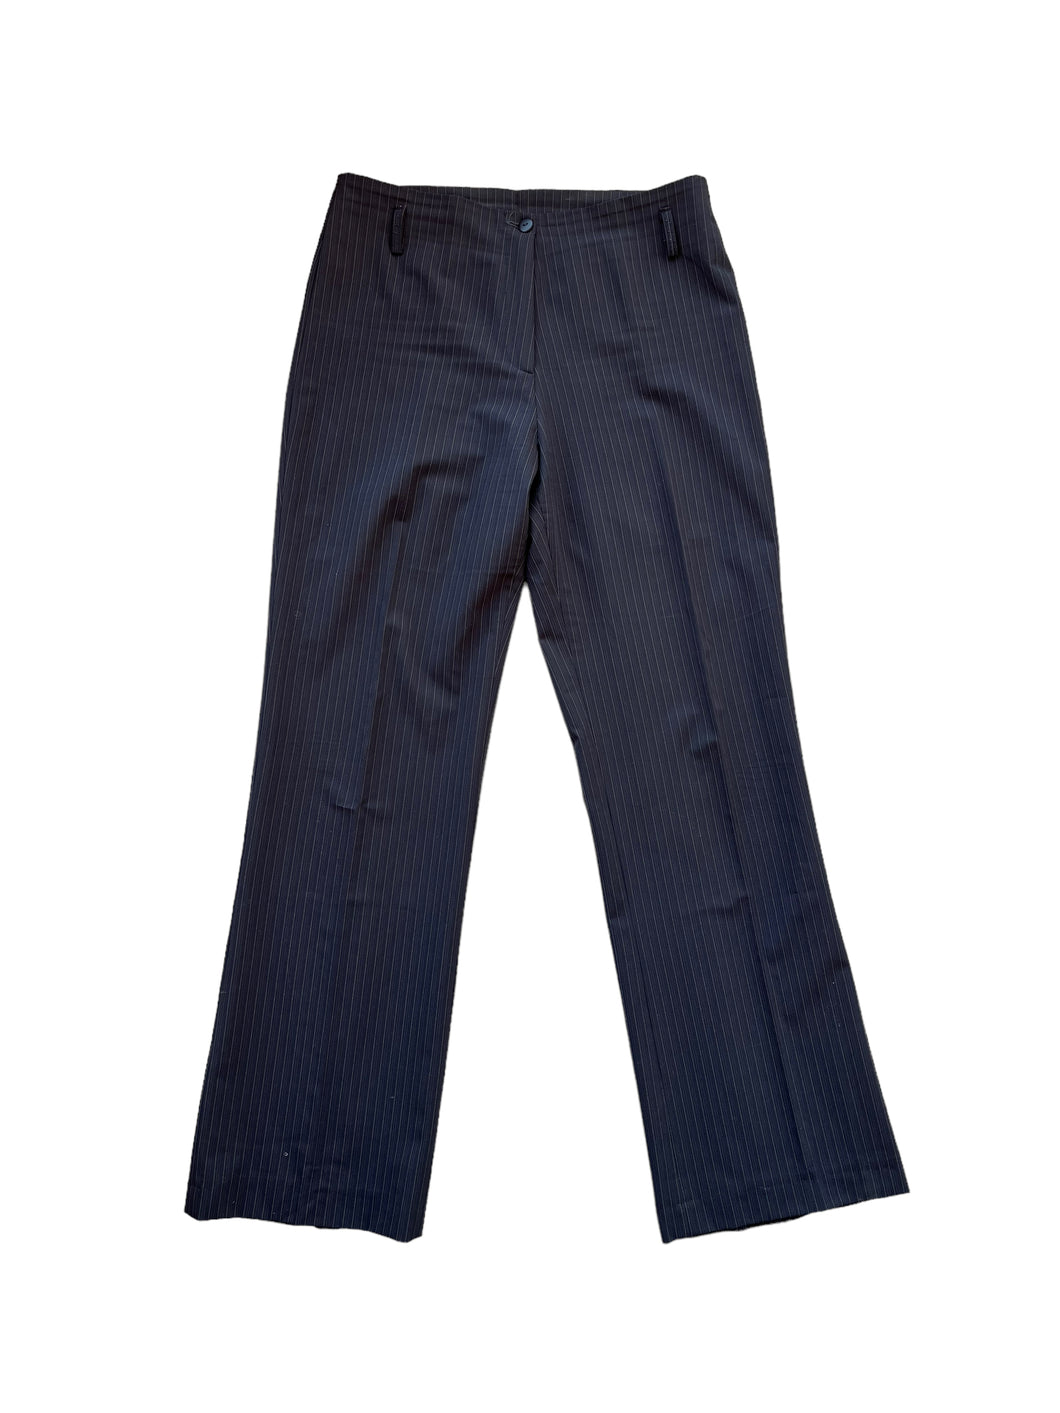 00s office flare pants